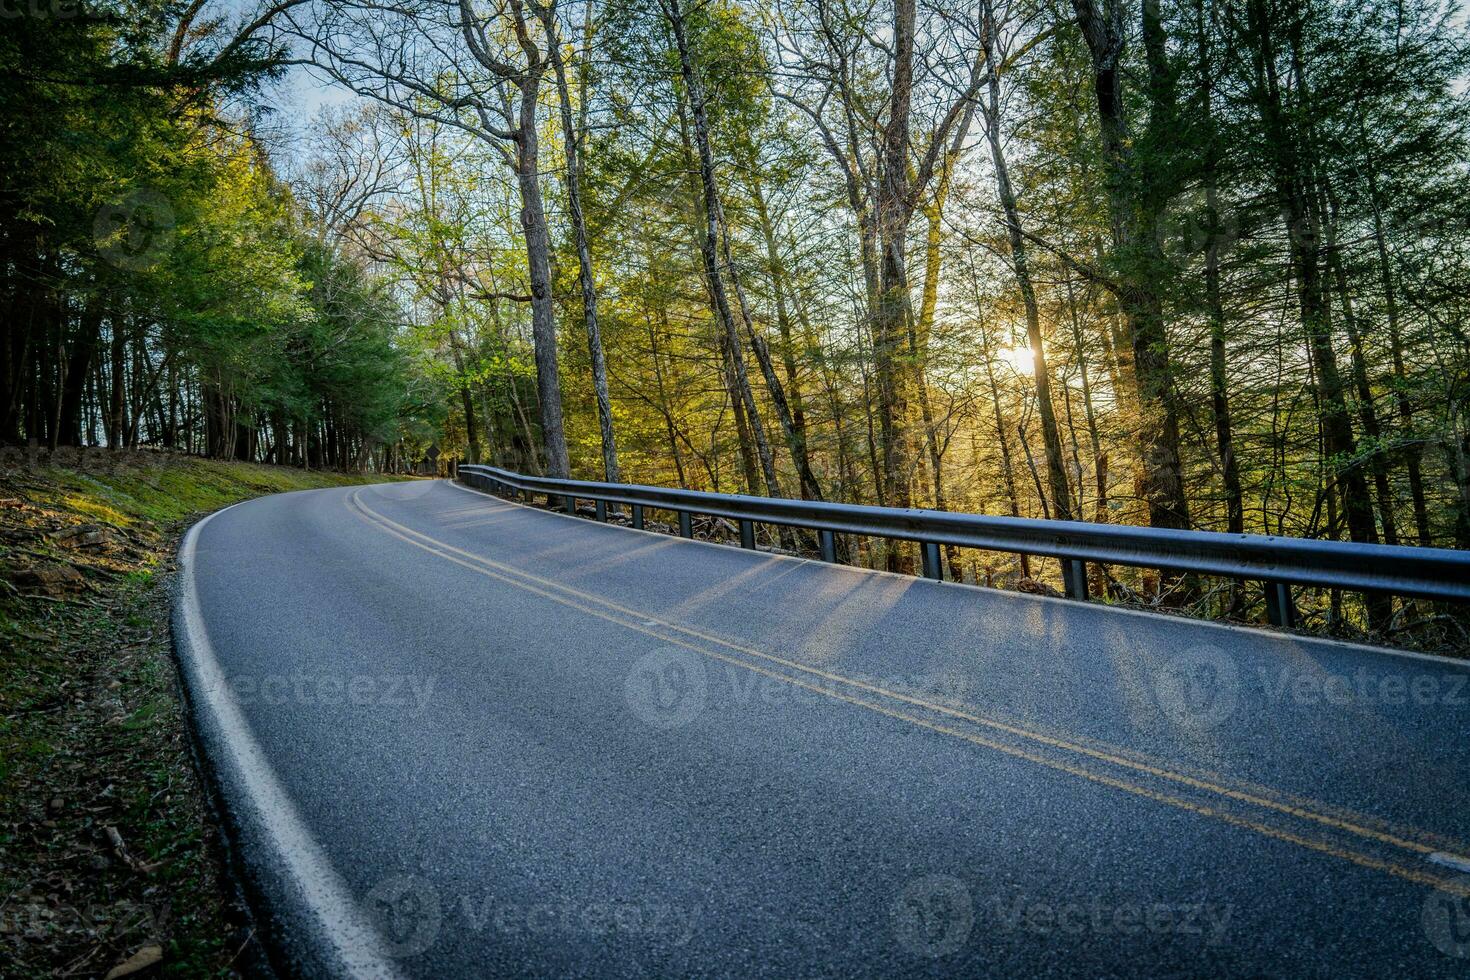 Winding uphill road in the woods with sunset peeking through the trees in early spring time photo